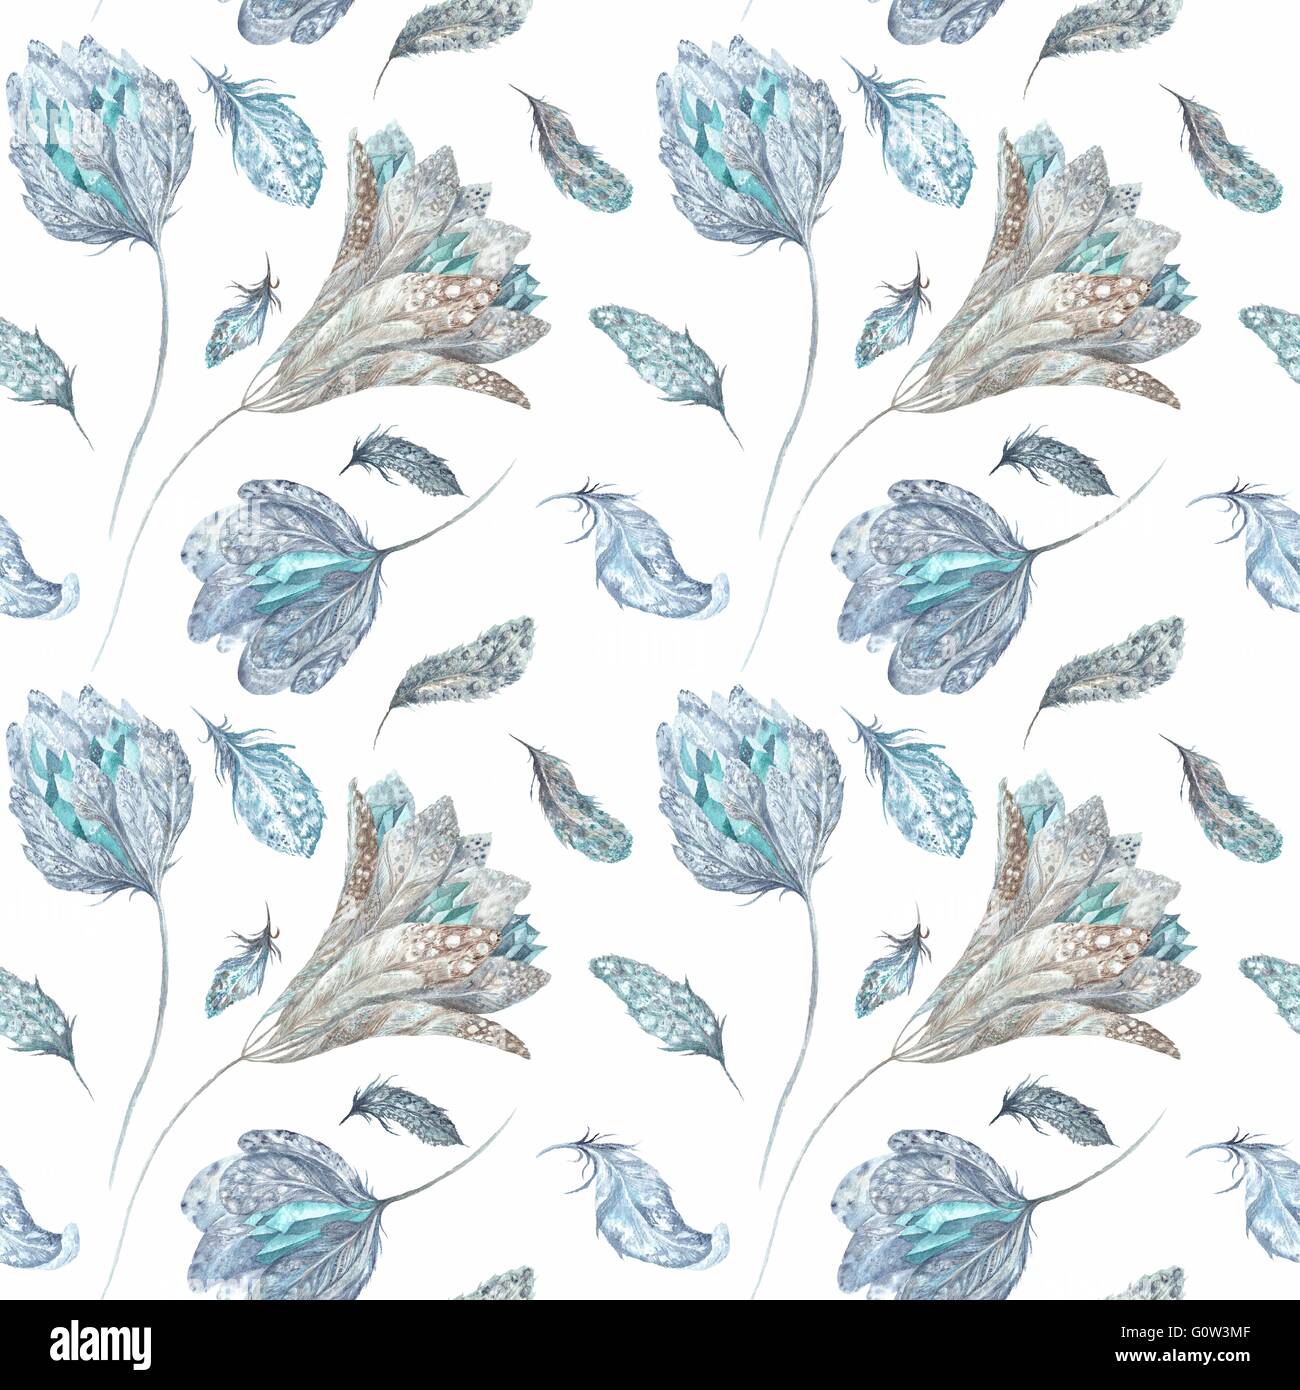 Seamless texture with feathers, flowers and crystals isolated on white background for textile and wallpaper design Stock Photo